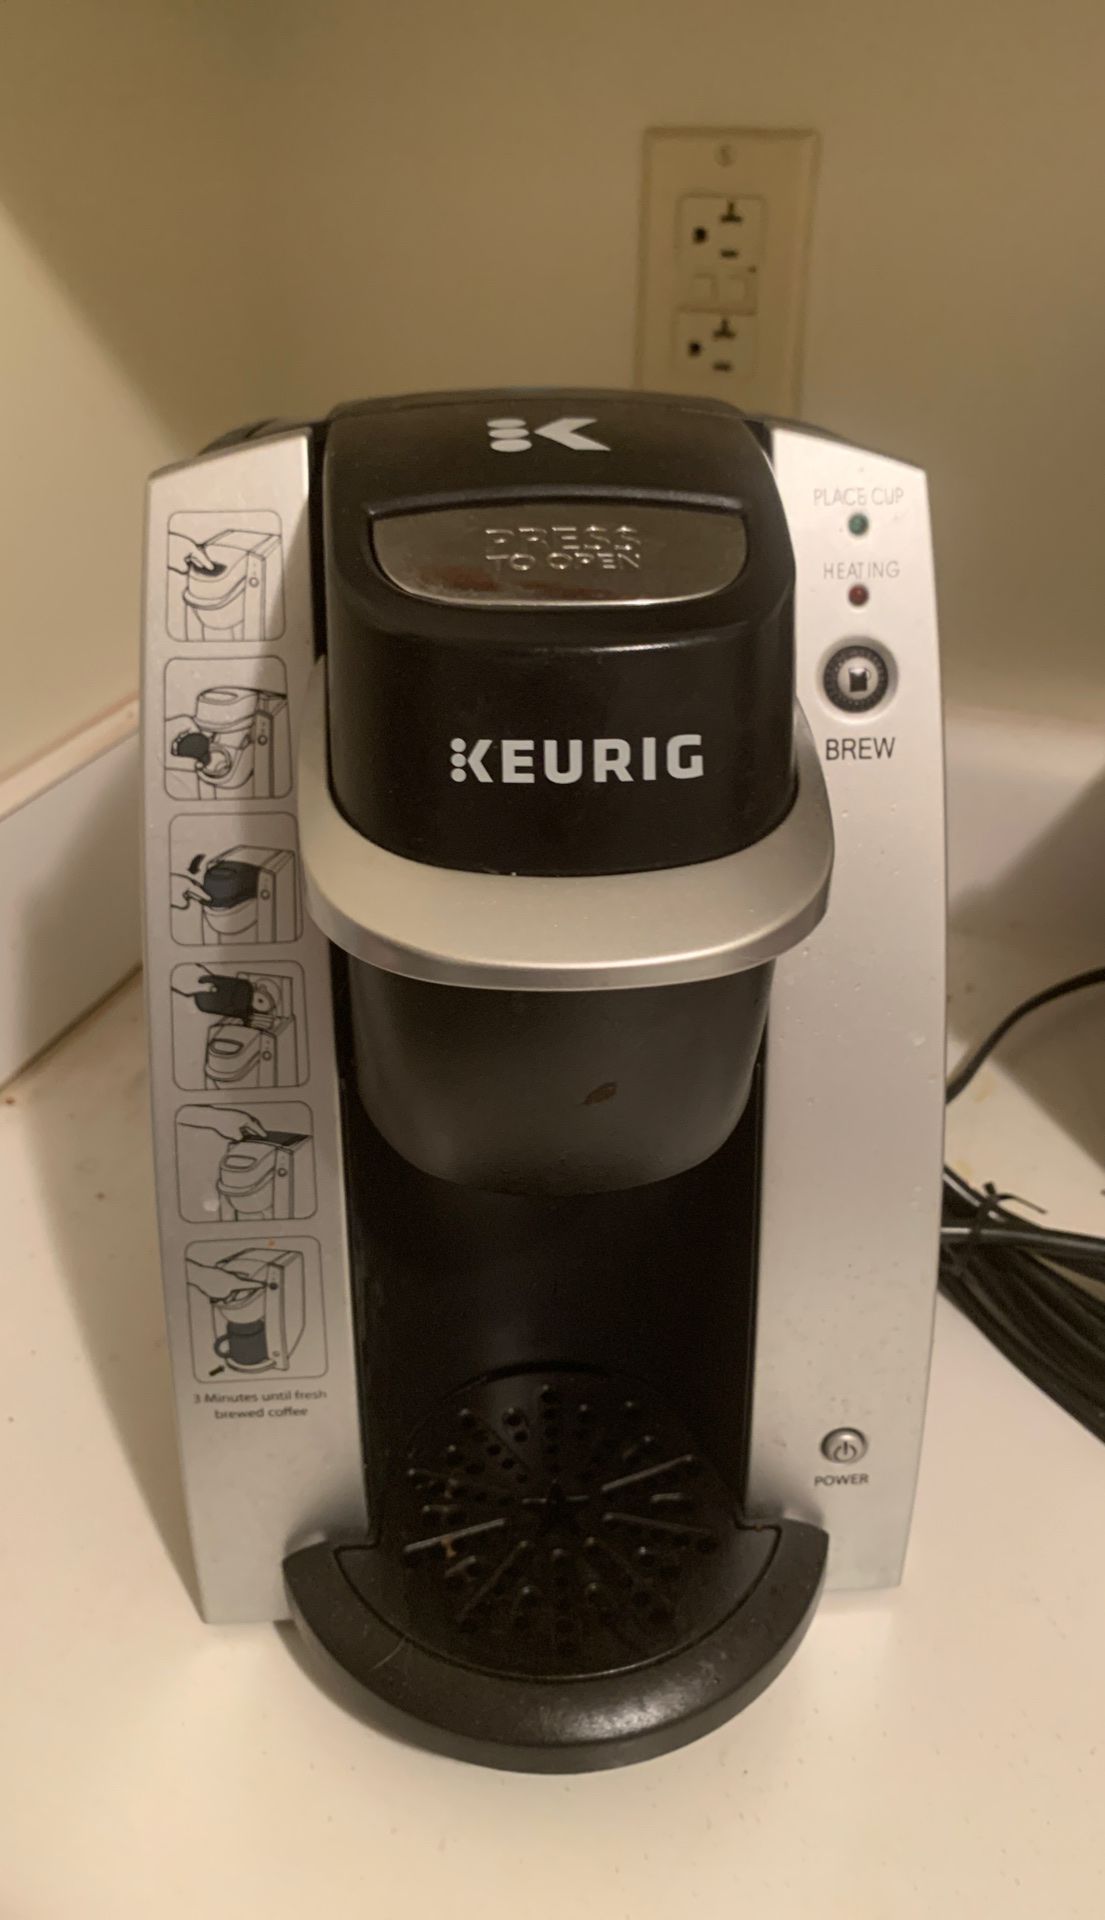 Keurig Coffee Maker in Wonderful Condition Selling For Cheap!